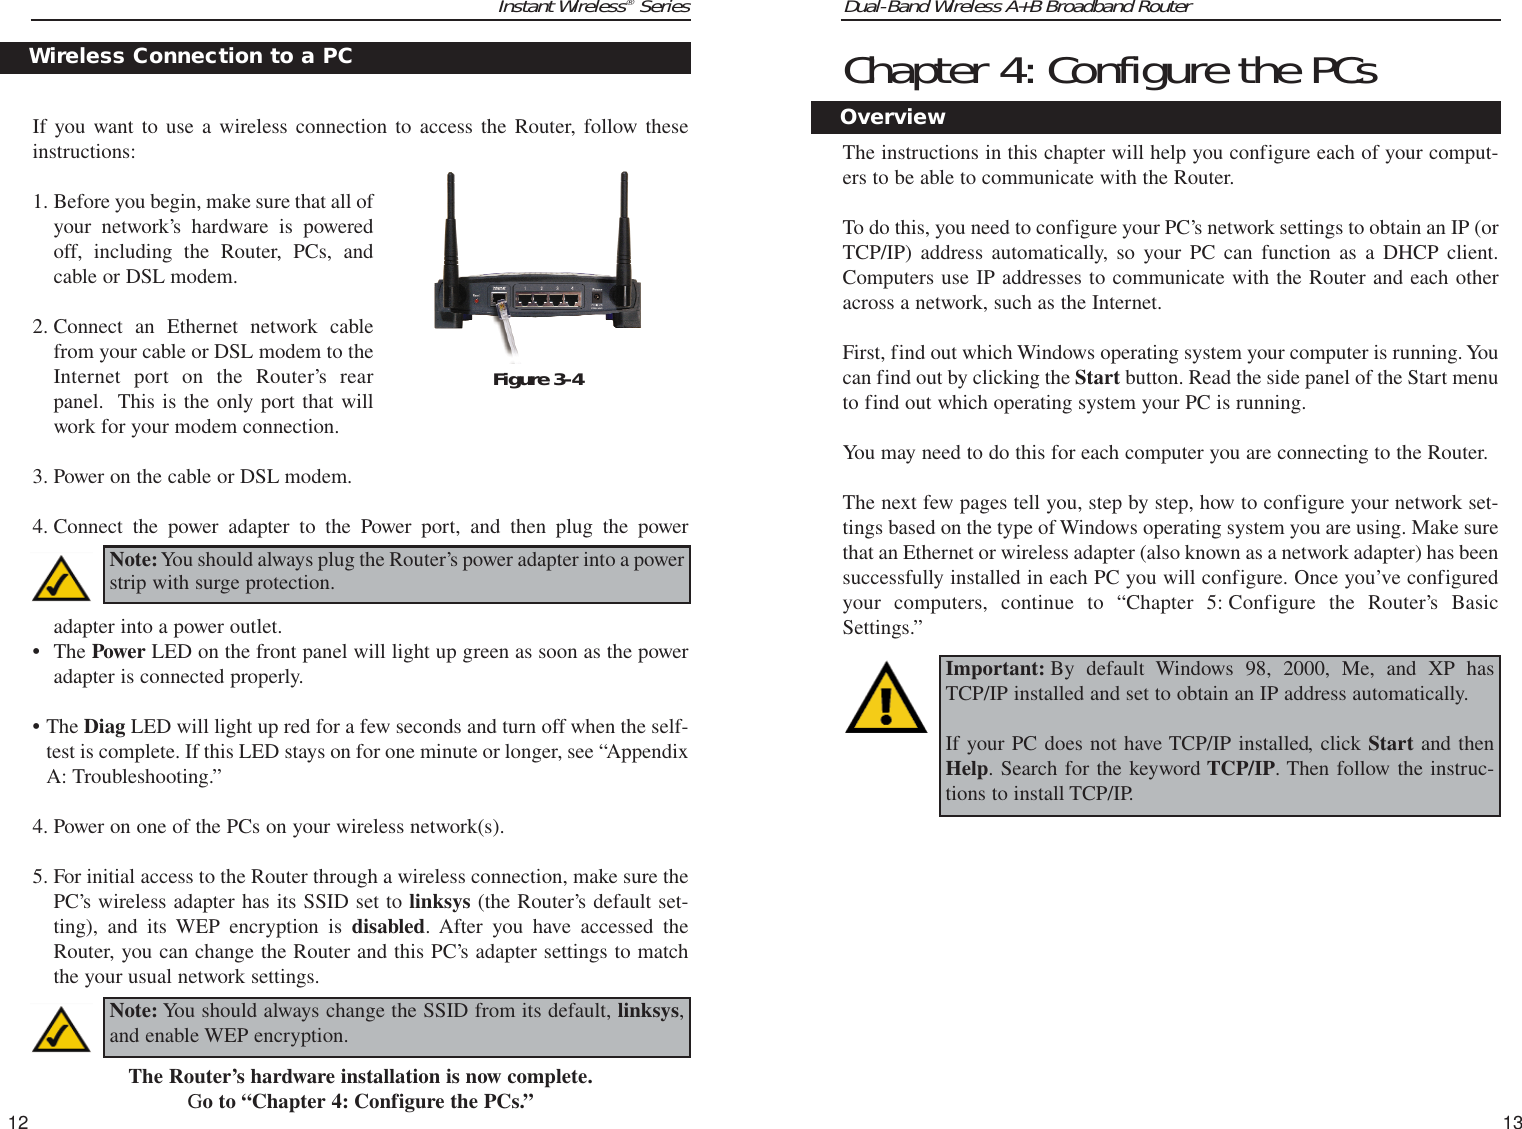 Dual-Band Wireless A+B Broadband Router Chapter 4: Configure the PCsThe instructions in this chapter will help you configure each of your comput-ers to be able to communicate with the Router.To do this, you need to configure your PC’s network settings to obtain an IP (orTCP/IP) address automatically, so your PC can function as a DHCP client.Computers use IP addresses to communicate with the Router and each otheracross a network, such as the Internet. First, find out which Windows operating system your computer is running. Youcan find out by clicking the Start button. Read the side panel of the Start menuto find out which operating system your PC is running.You may need to do this for each computer you are connecting to the Router.The next few pages tell you, step by step, how to configure your network set-tings based on the type of Windows operating system you are using. Make surethat an Ethernet or wireless adapter (also known as a network adapter) has beensuccessfully installed in each PC you will configure. Once you’ve configuredyour computers, continue to “Chapter 5: Configure the Router’s BasicSettings.” 13Instant Wireless®Series12Important: By default Windows 98, 2000, Me, and XP hasTCP/IP installed and set to obtain an IP address automatically. If your PC does not have TCP/IP installed, click Start and thenHelp. Search for the keyword TCP/IP. Then follow the instruc-tions to install TCP/IP.OverviewIf you want to use a wireless connection to access the Router, follow theseinstructions:1. Before you begin, make sure that all ofyour network’s hardware is poweredoff, including the Router, PCs, andcable or DSL modem.2. Connect an Ethernet network cablefrom your cable or DSL modem to theInternet port on the Router’s rearpanel.  This is the only port that willwork for your modem connection. 3. Power on the cable or DSL modem. 4. Connect the power adapter to the Power port, and then plug the poweradapter into a power outlet.  •The Power LED on the front panel will light up green as soon as the poweradapter is connected properly.•The Diag LED will light up red for a few seconds and turn off when the self-test is complete. If this LED stays on for one minute or longer, see “AppendixA: Troubleshooting.”4. Power on one of the PCs on your wireless network(s).5. For initial access to the Router through a wireless connection, make sure thePC’s wireless adapter has its SSID set to linksys (the Router’s default set-ting), and its WEP encryption is disabled. After you have accessed theRouter, you can change the Router and this PC’s adapter settings to matchthe your usual network settings.The Router’s hardware installation is now complete.Go to “Chapter 4: Configure the PCs.”Wireless Connection to a PCNote:You should always plug the Router’s power adapter into a powerstrip with surge protection.Figure 3-4Note: You should always change the SSID from its default, linksys,and enable WEP encryption.